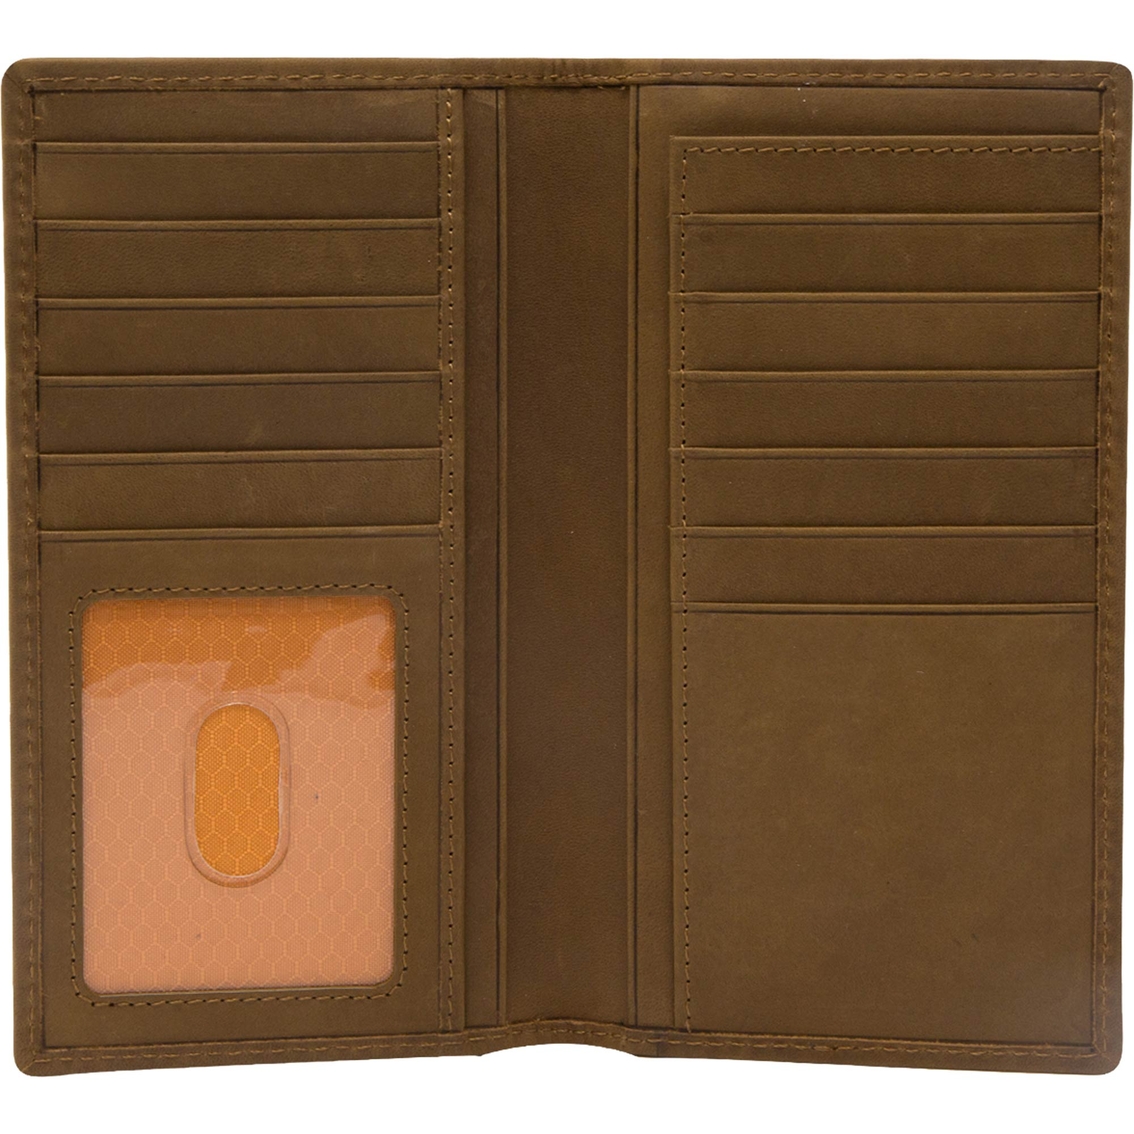 Timberland Pro Leather Pullman Rodeo Wallet - Image 2 of 2